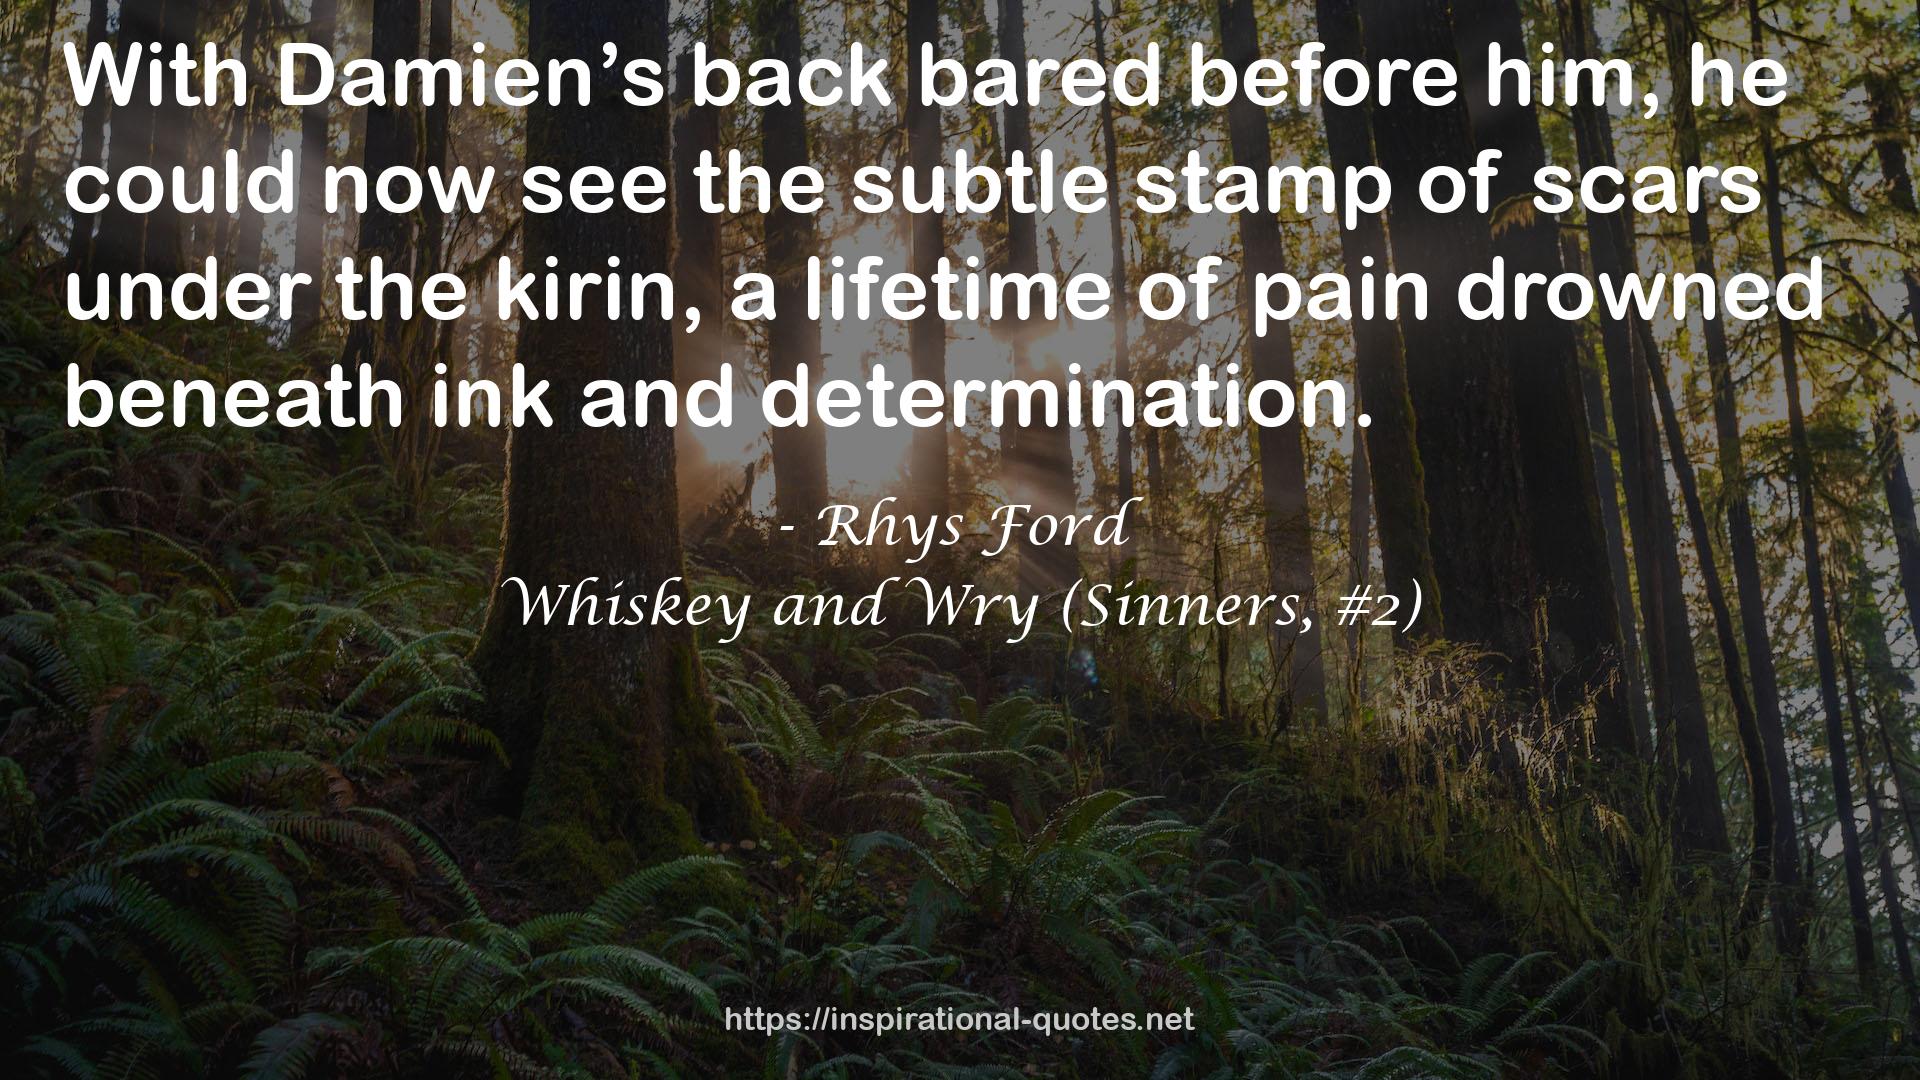 Whiskey and Wry (Sinners, #2) QUOTES